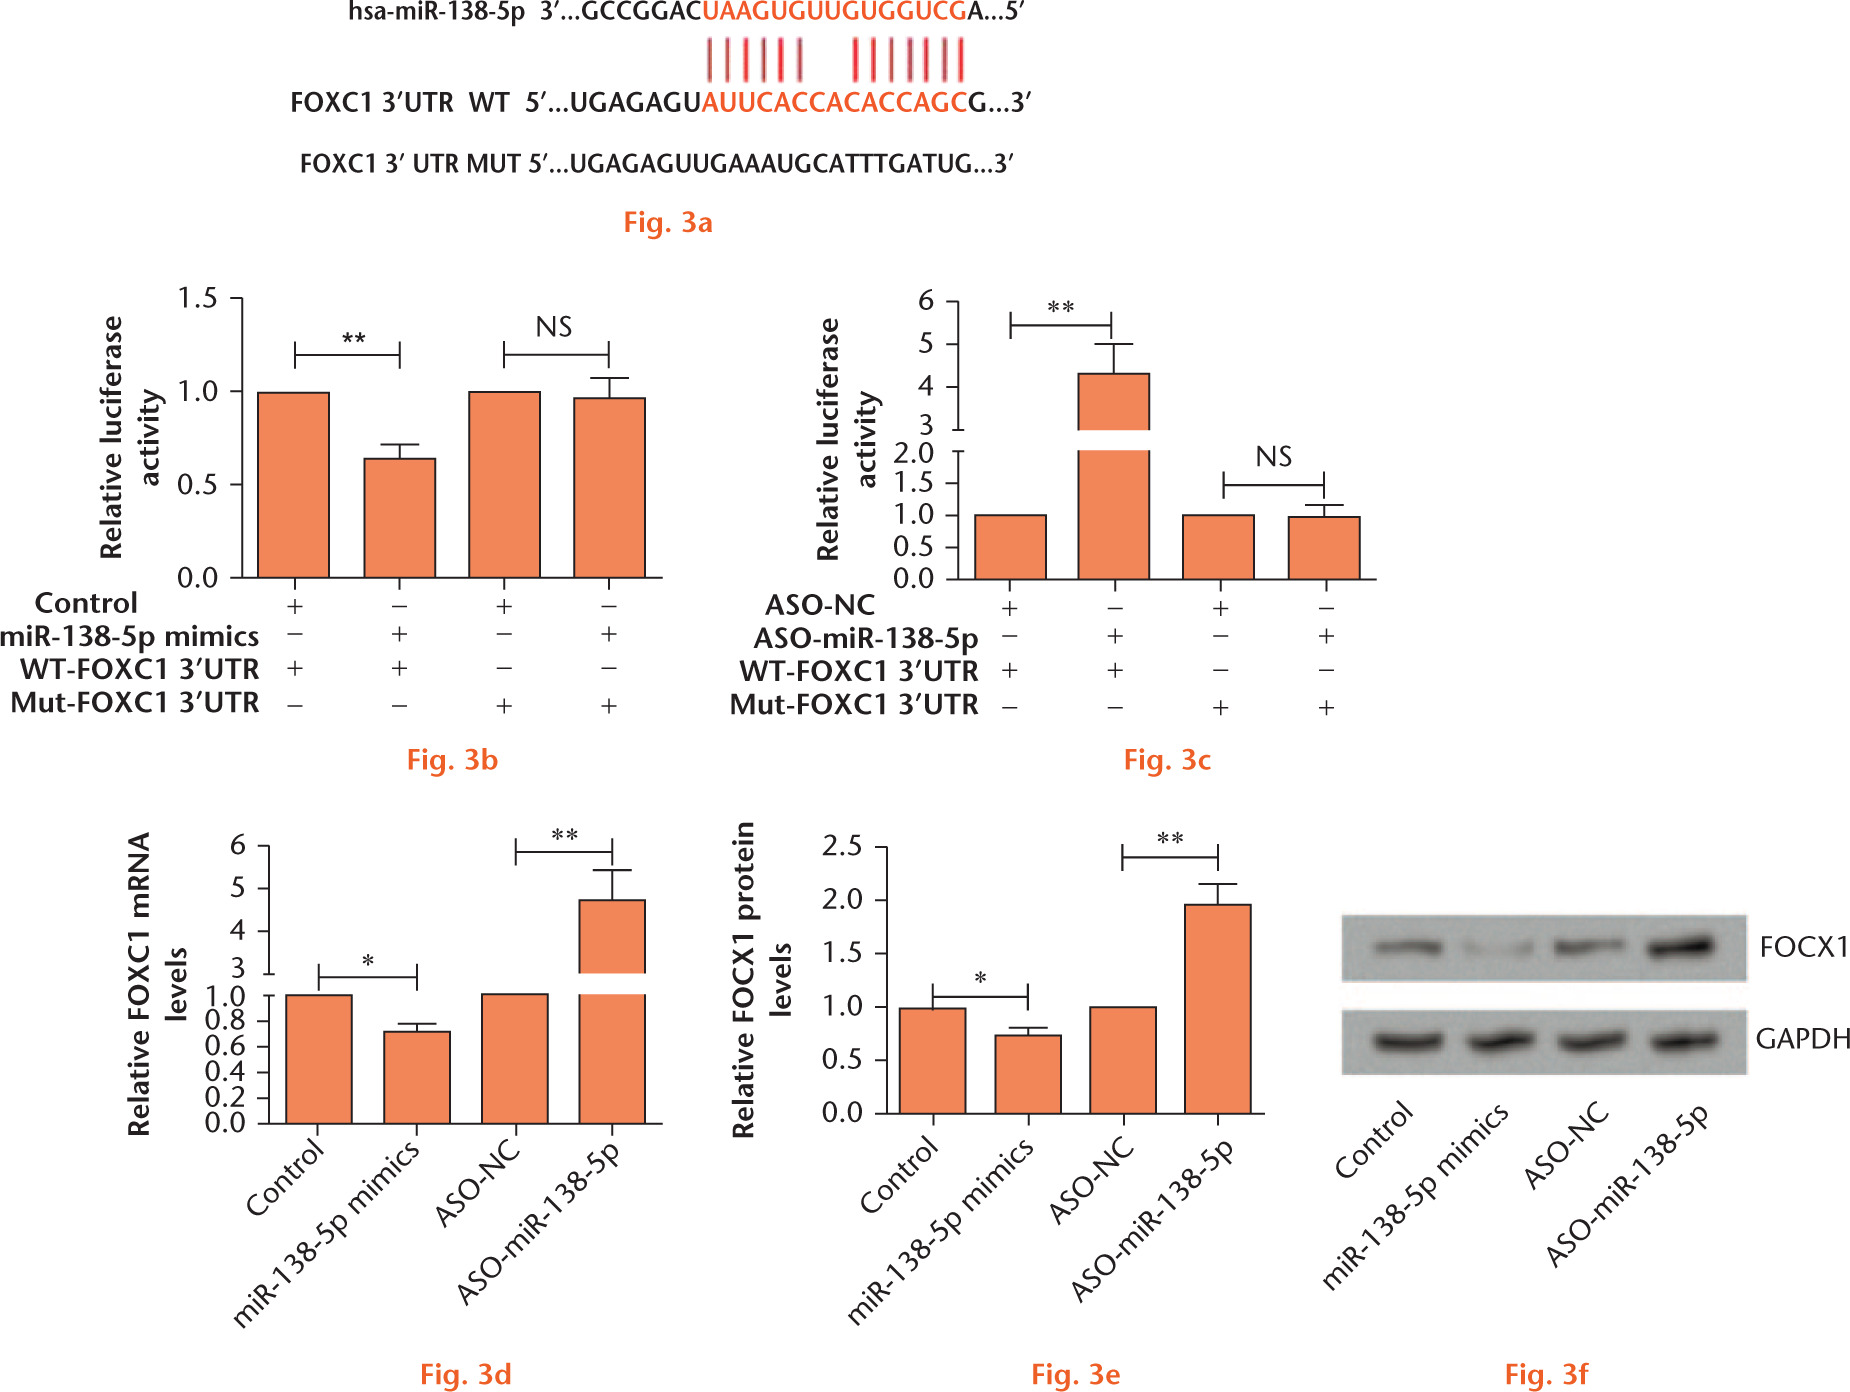  
            FOXC1 is a direct target of miR-138-5p and is negatively regulated by miR-138-5p. The cells in the control group were transfected with miR-138-5p mimics or ASO-miR-138-5p negative controls, and the cells in other groups were transfected with miR-138-5p mimics or ASO-miR-138-5p: a) software prediction of miR-138-5p potential binding sites on FOXC1 3’-UTR; b) relative luciferase activity in co-transfection of miR-138-5p mimics with WT or MUT-FOXC1 3’-UTR vectors; c) relative luciferase activity in co-transfection of ASO-miR-138-5p with WT or MUT-FOXC1 3’-UTR vectors; d) relative mRNA levels of FOXC1 after alteration of the expression of miR-138-5p; e) relative protein levels of FOXC1 after alteration of the expression of miR-138-5p; f) representative pictures of Western blot. (miR-138, microRNA-138; OA, osteoarthritis; FOXC1, Forkhead Box C1; UTR, untranslated regions; WT, wild type; MUT, mutant; ASO, allele-specific oligonucleotide; NC, negative control; NS, no significance.) *p < 0.05;**p < 0.01.
          